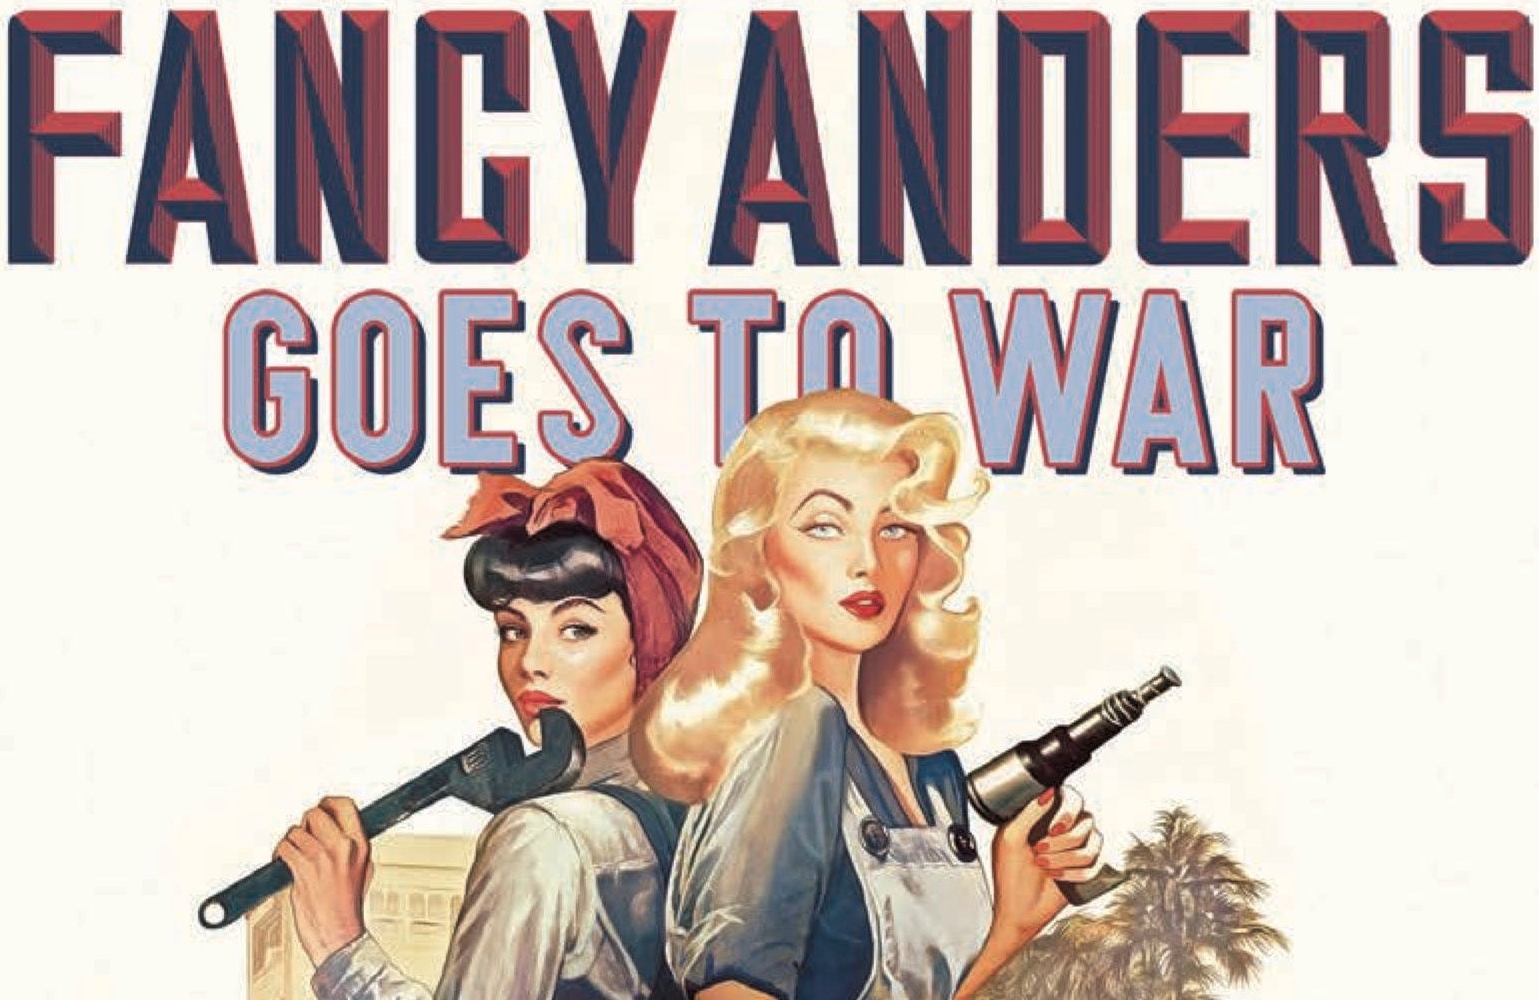 Max Allan Collins marries crime and history in 'Fancy Anders Goes to War'